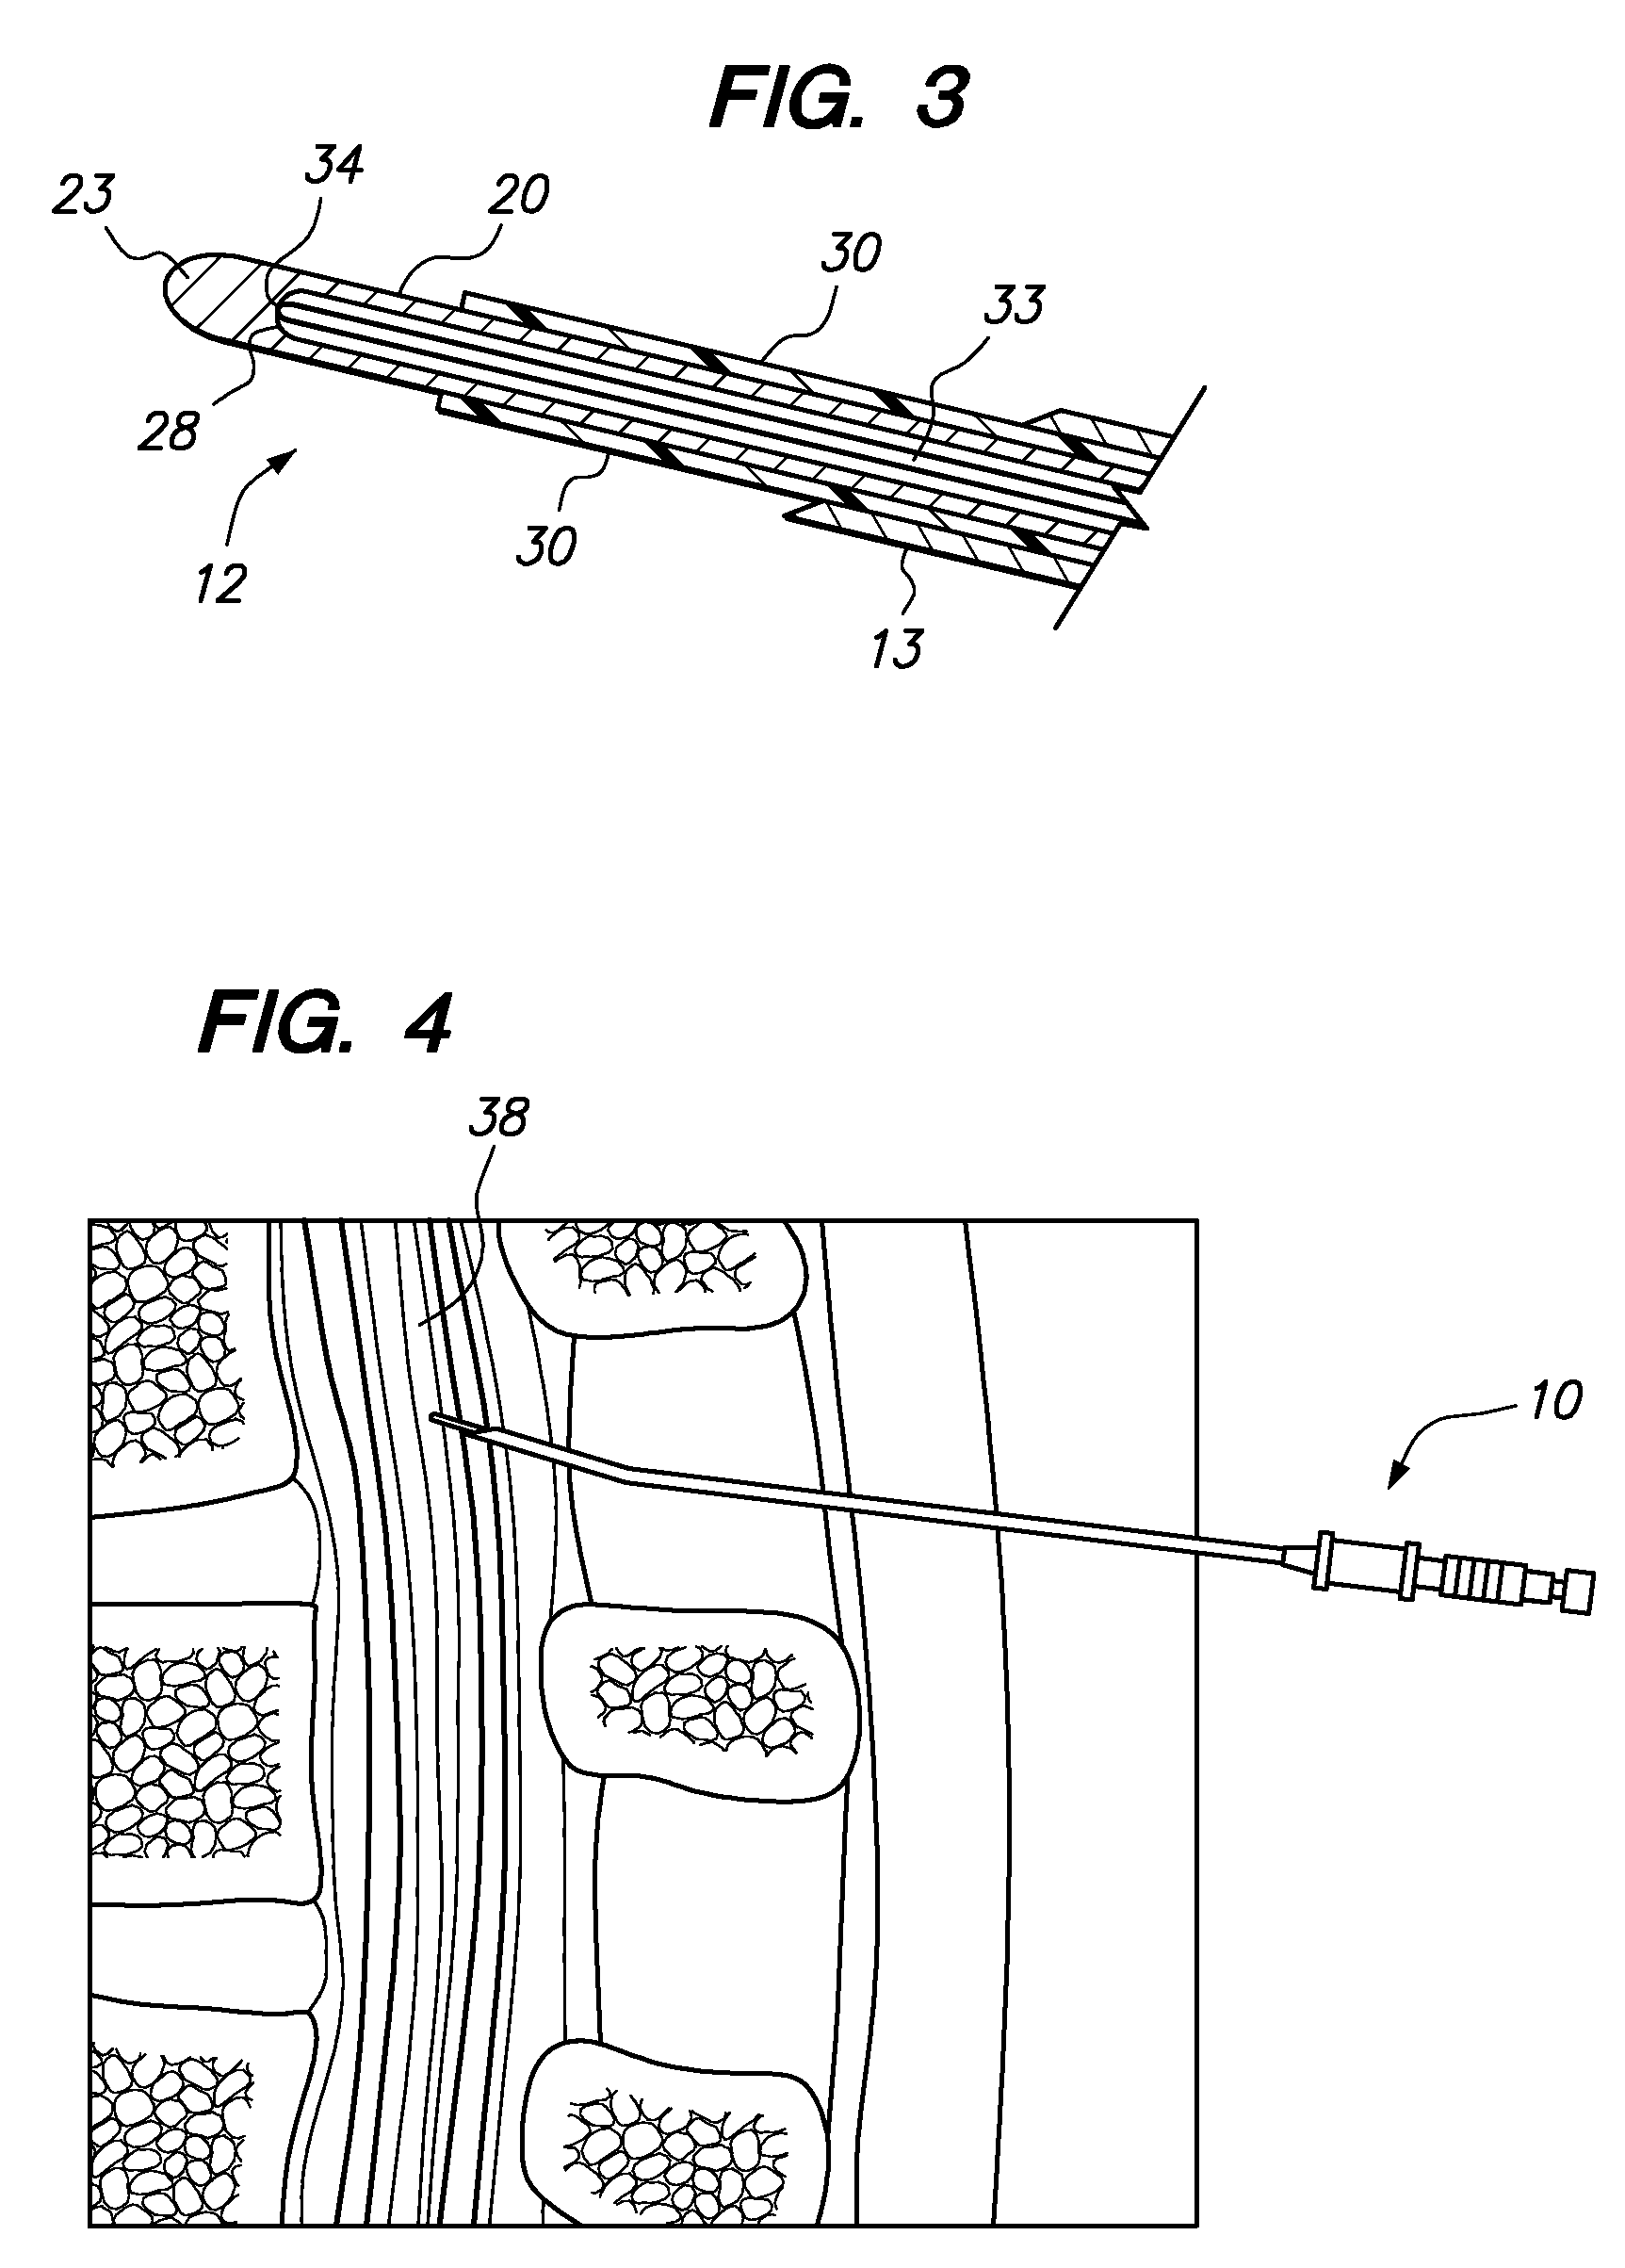 Epidural radiofrequency catheter for effectuating RF treatment in spinal canal and method of using same